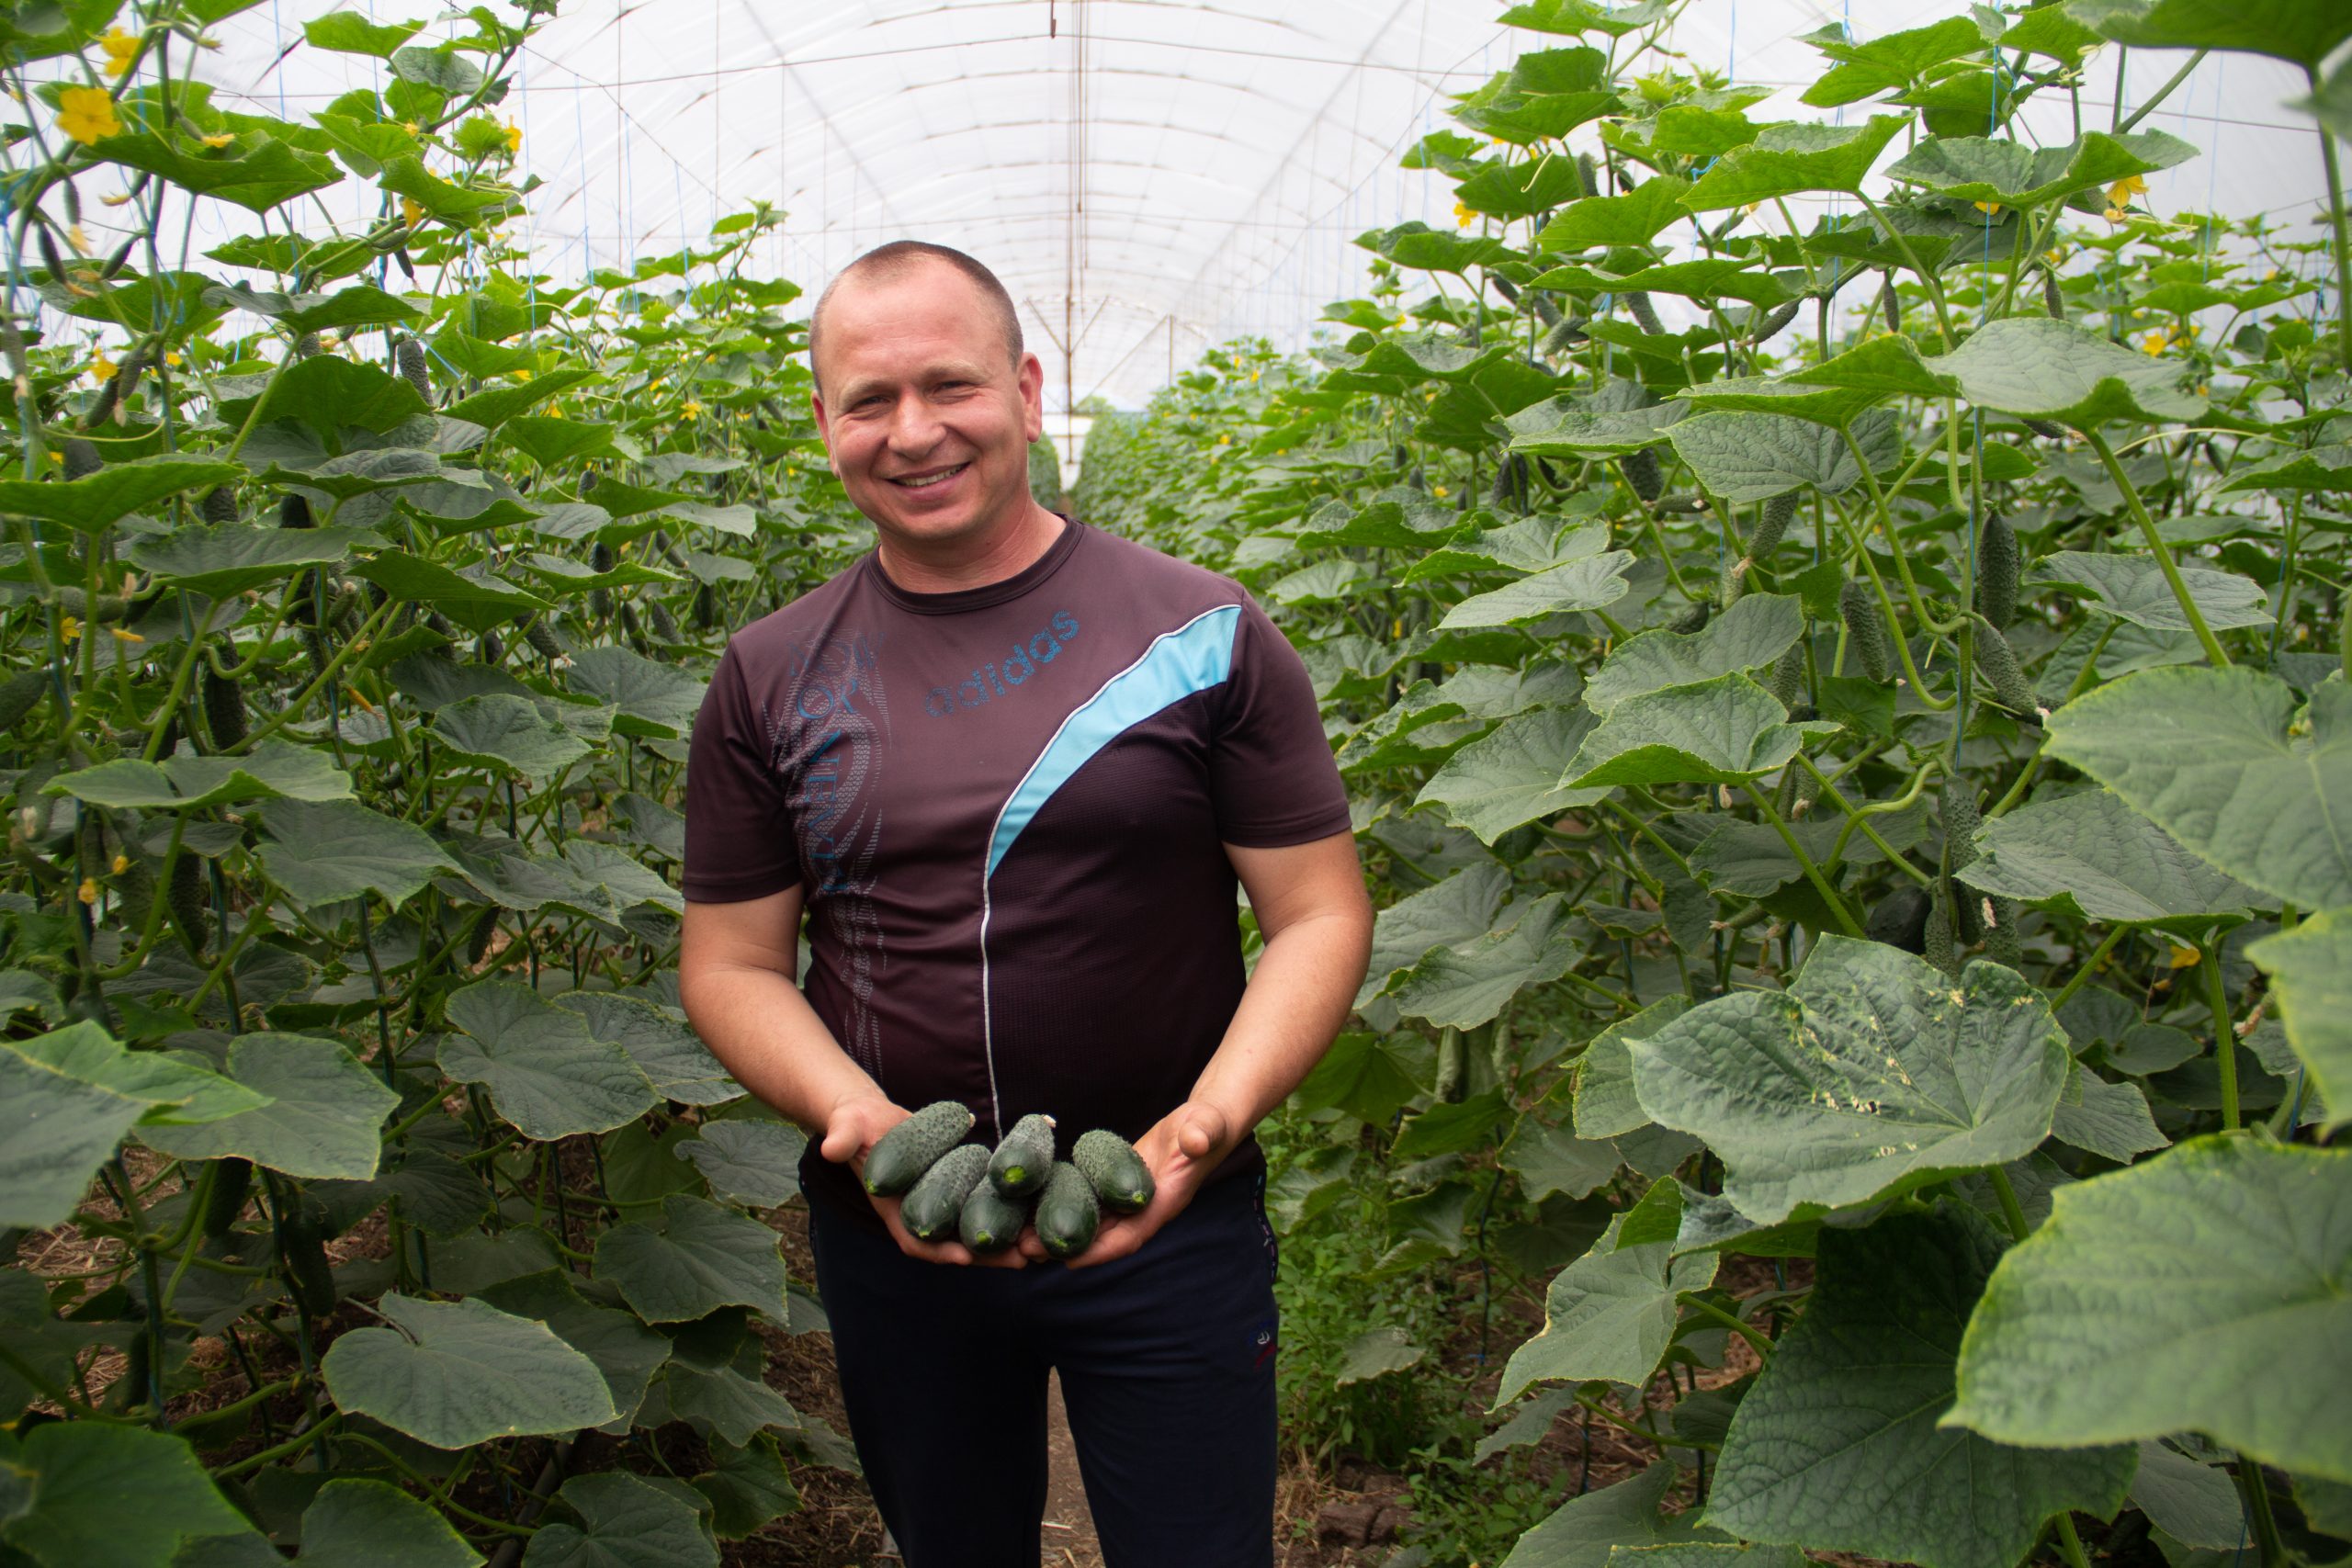 A farmer smiles as he holds cucumbers in his greenhouse.